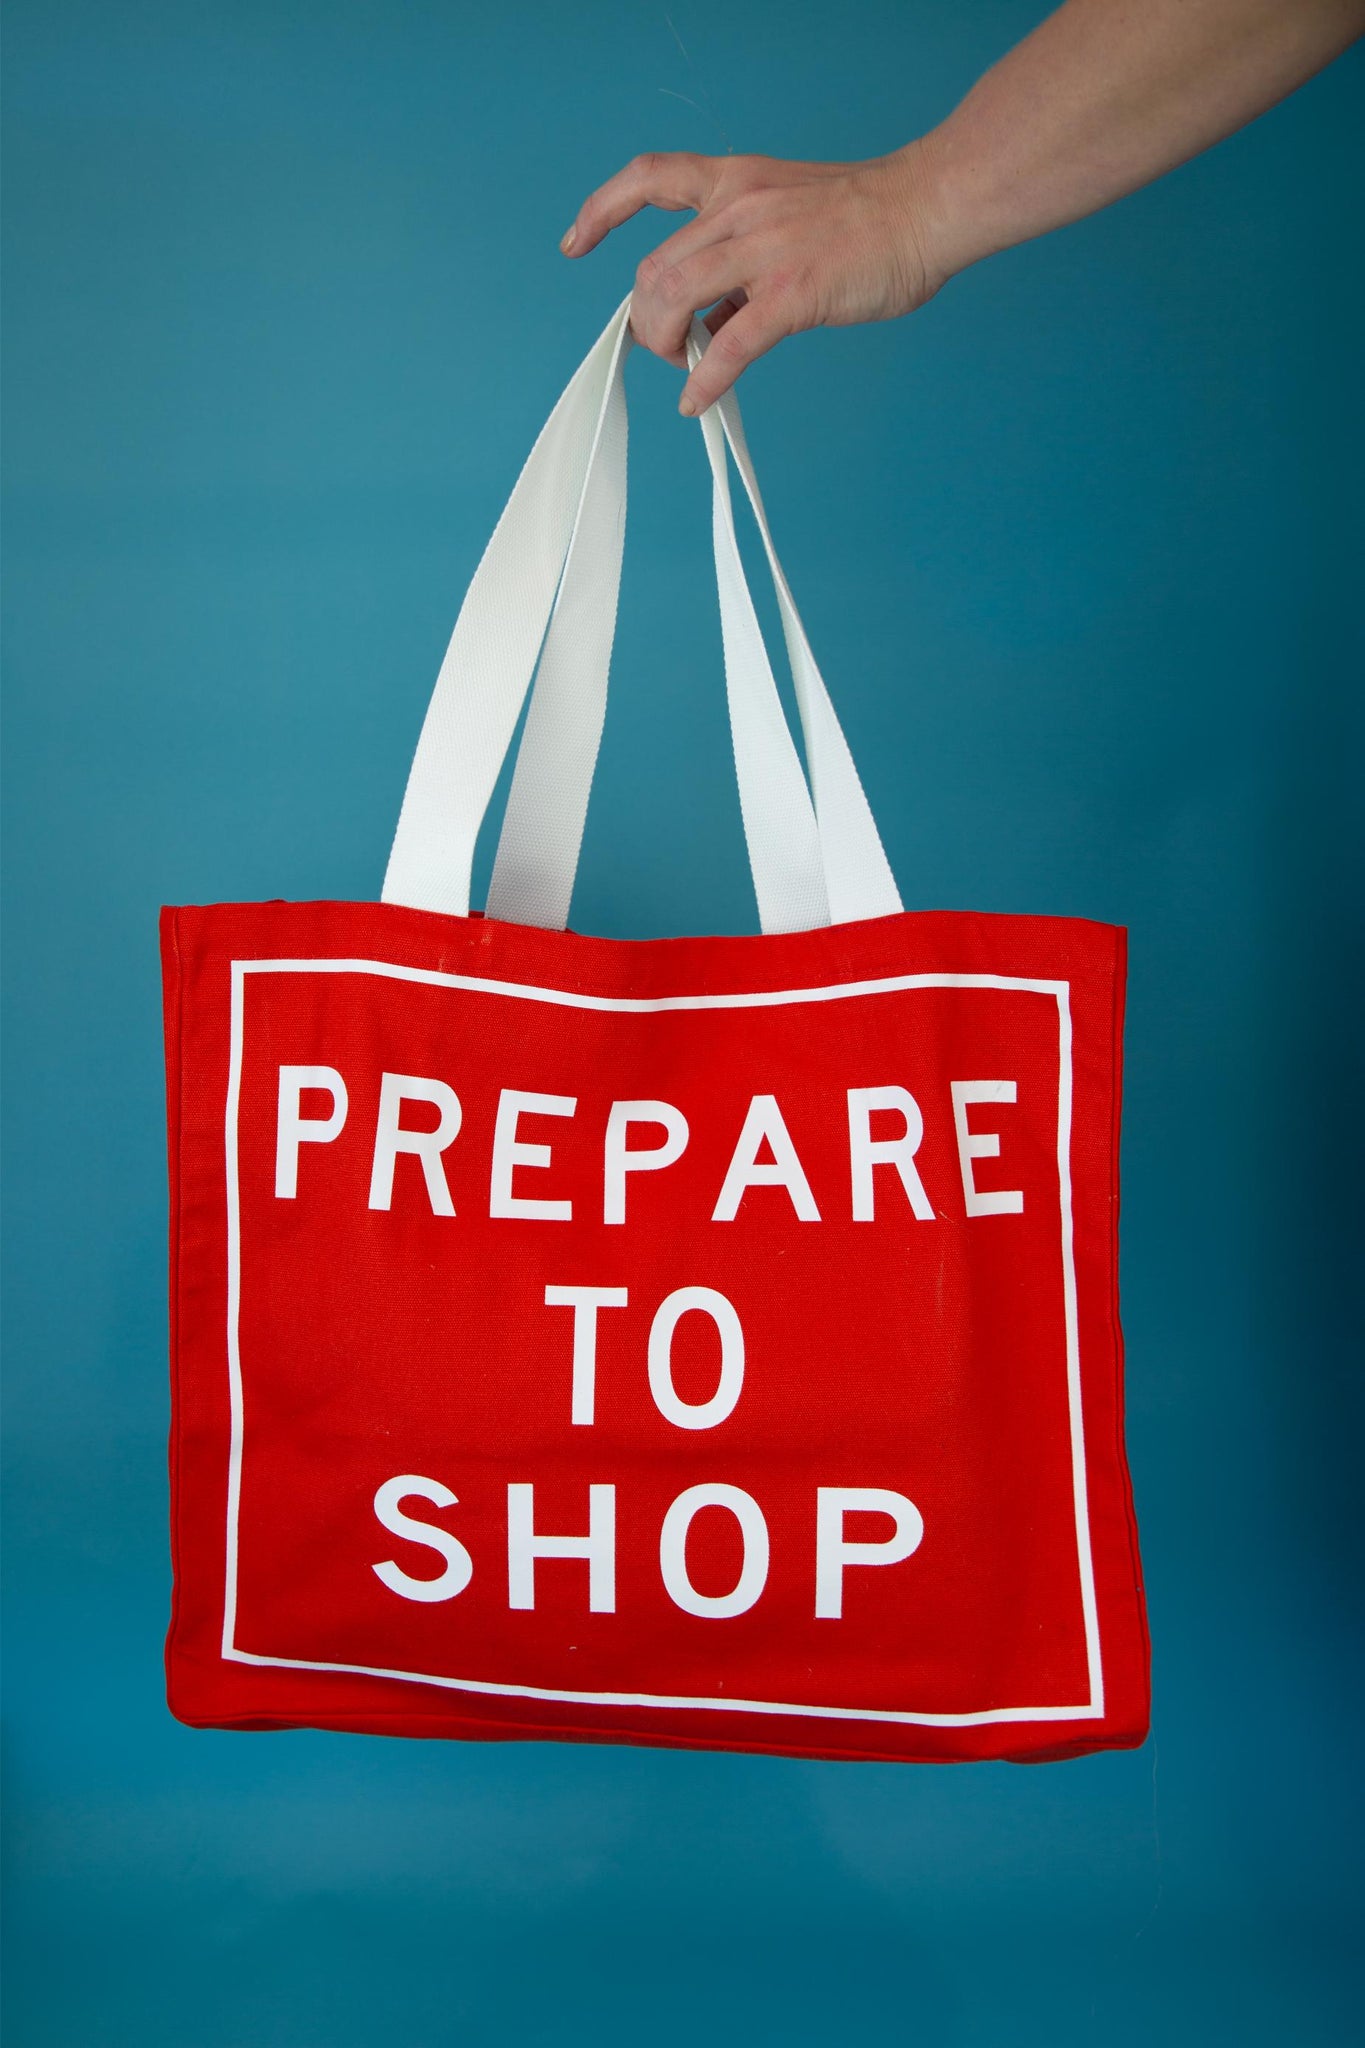 Prepare to Shop Tote x Richard Tipping